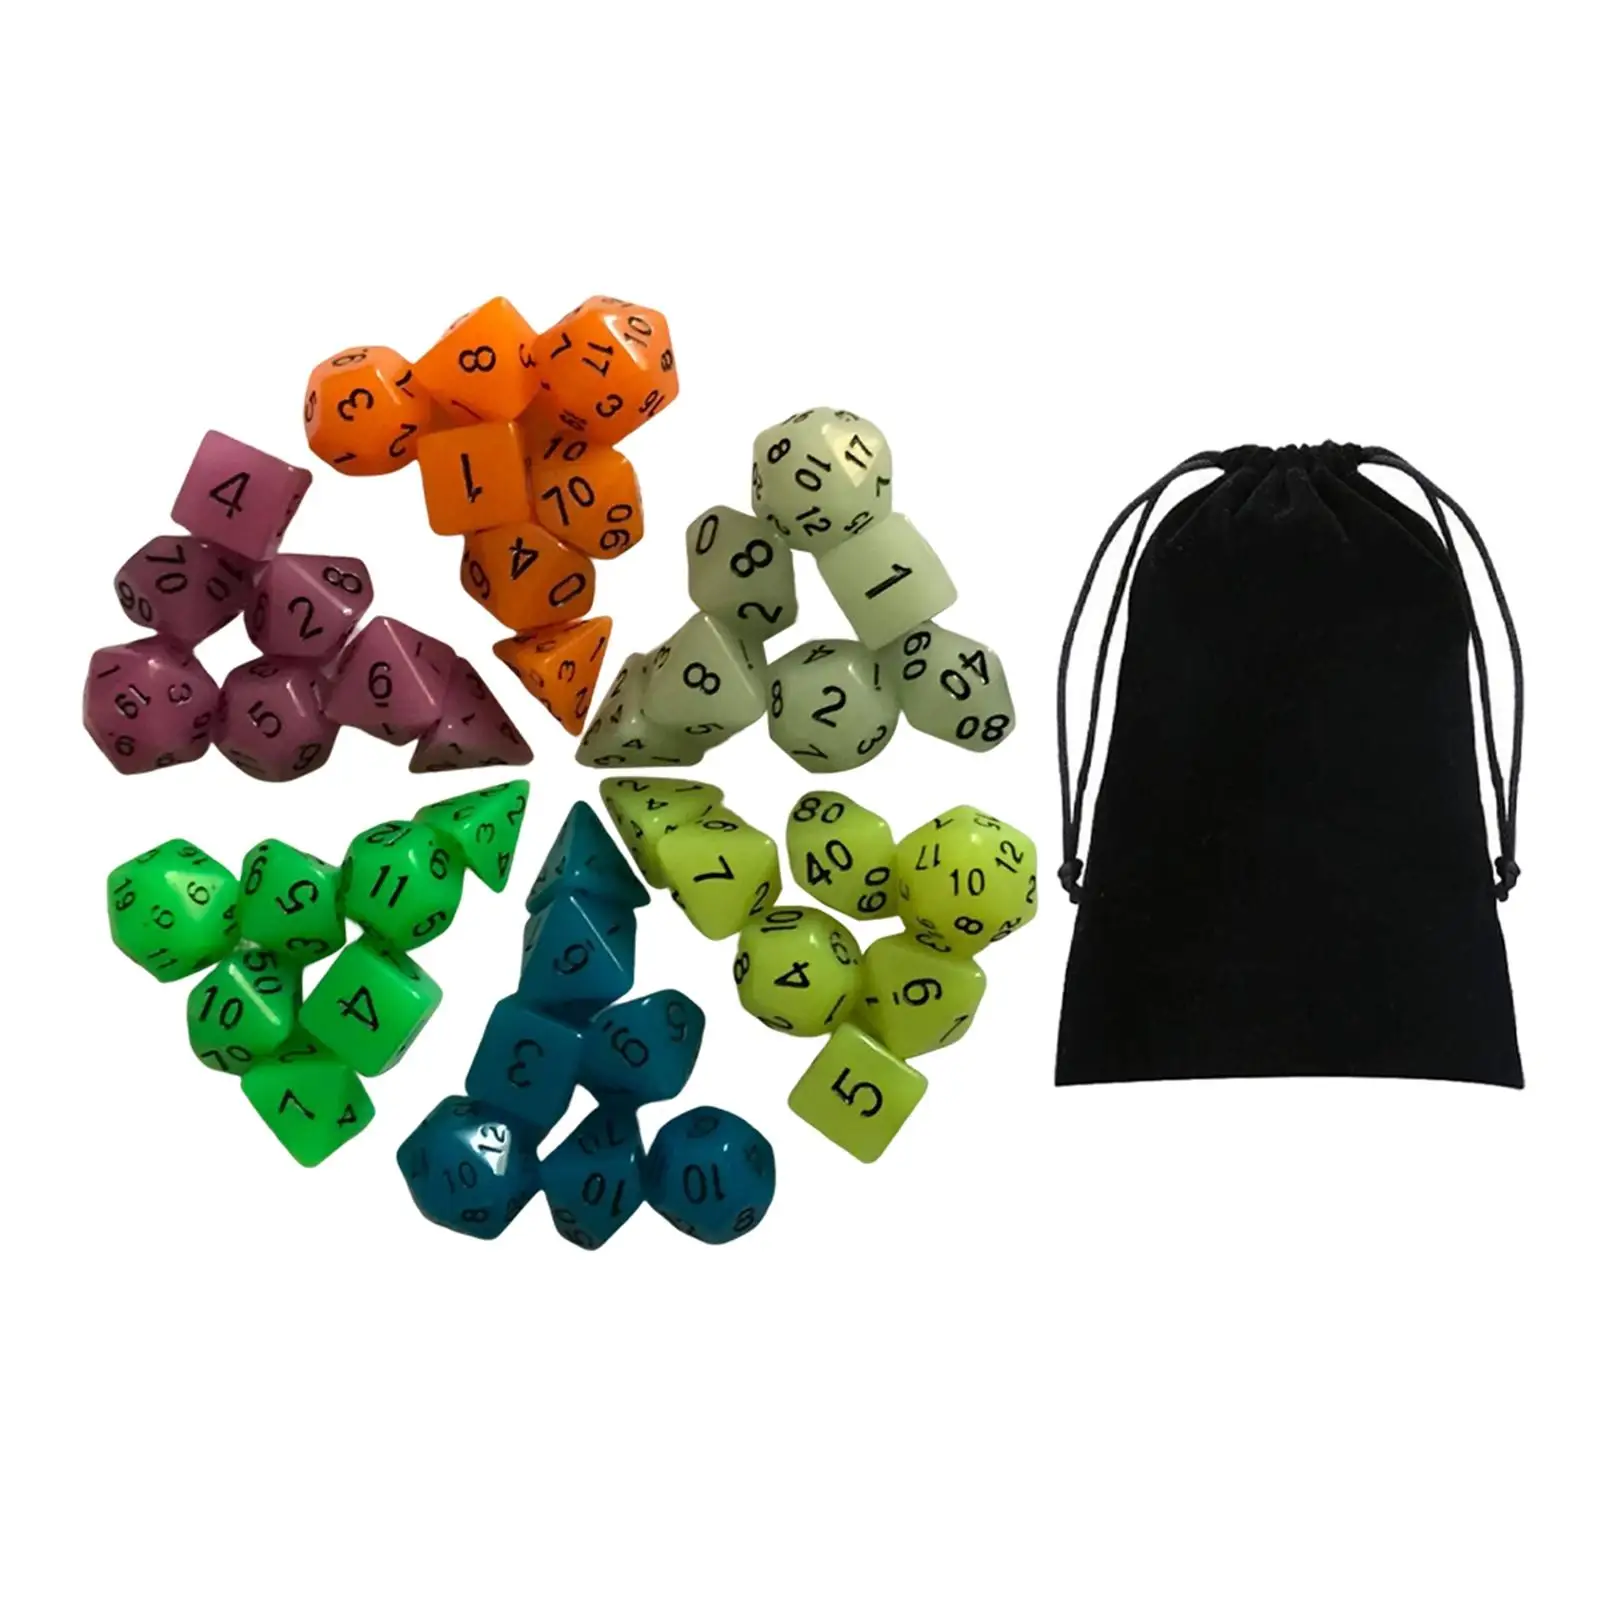 Acrylic Luminous RPG Set D8 D10 D12 D20 with Pouch Glowing Polyhedral Dices Set for DND Role Playing RPG Table Games